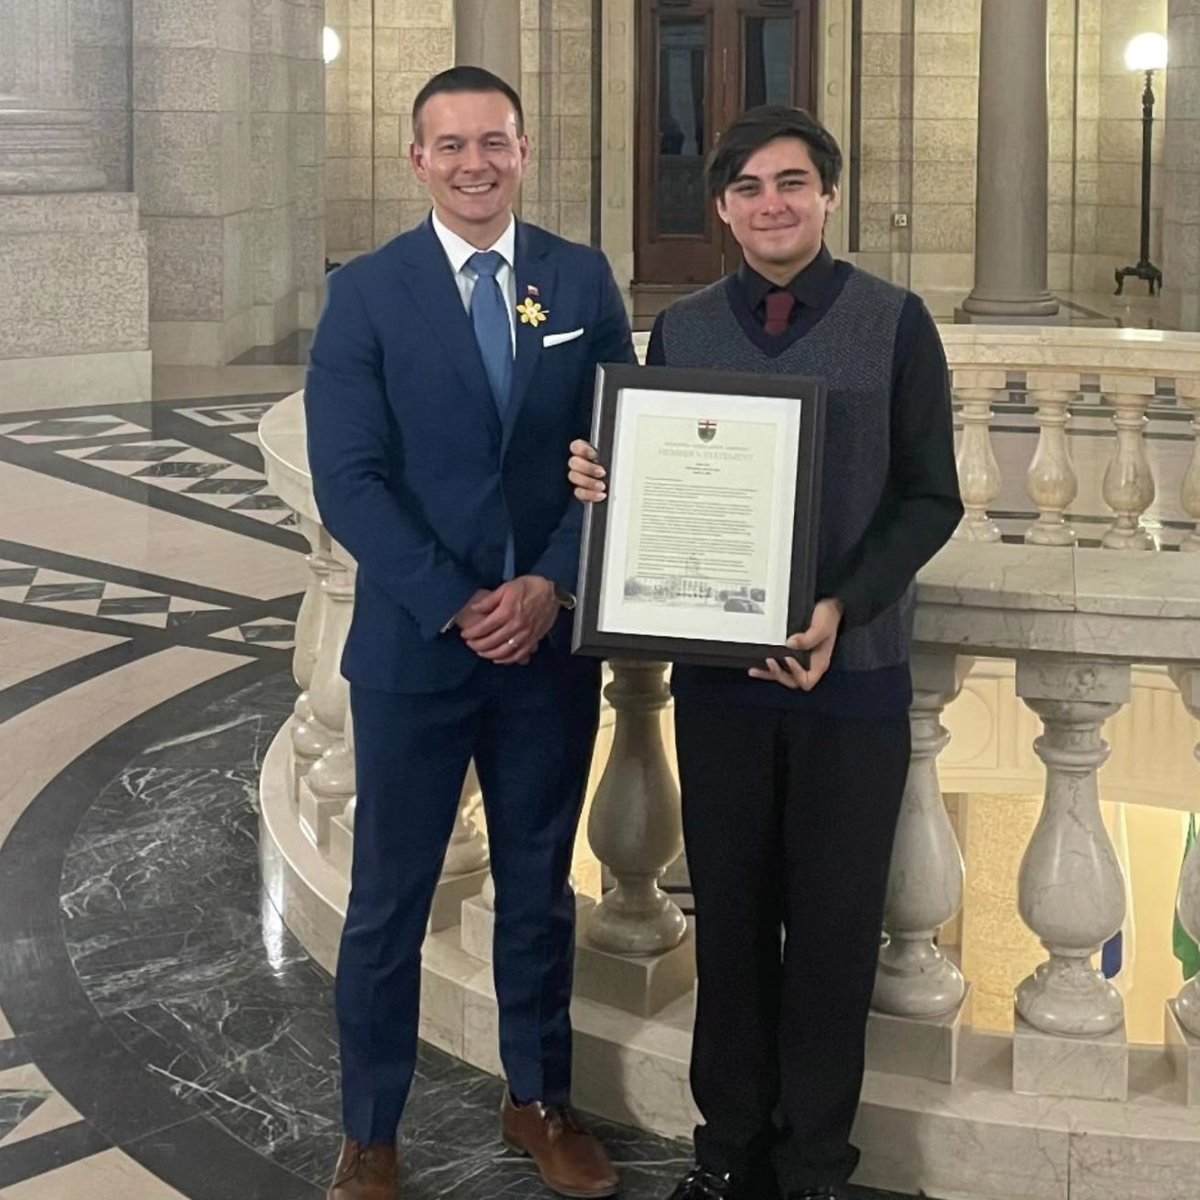 It was my pleasure to highlight the achievements and music of Ethan Lyric in a Member's Statement in the legislature. In addition to being a young Indigenous singer, Ethan was a Loran Scholarship finalist, and has been an inspiration to youth throughout MB. Well done, Ethan!